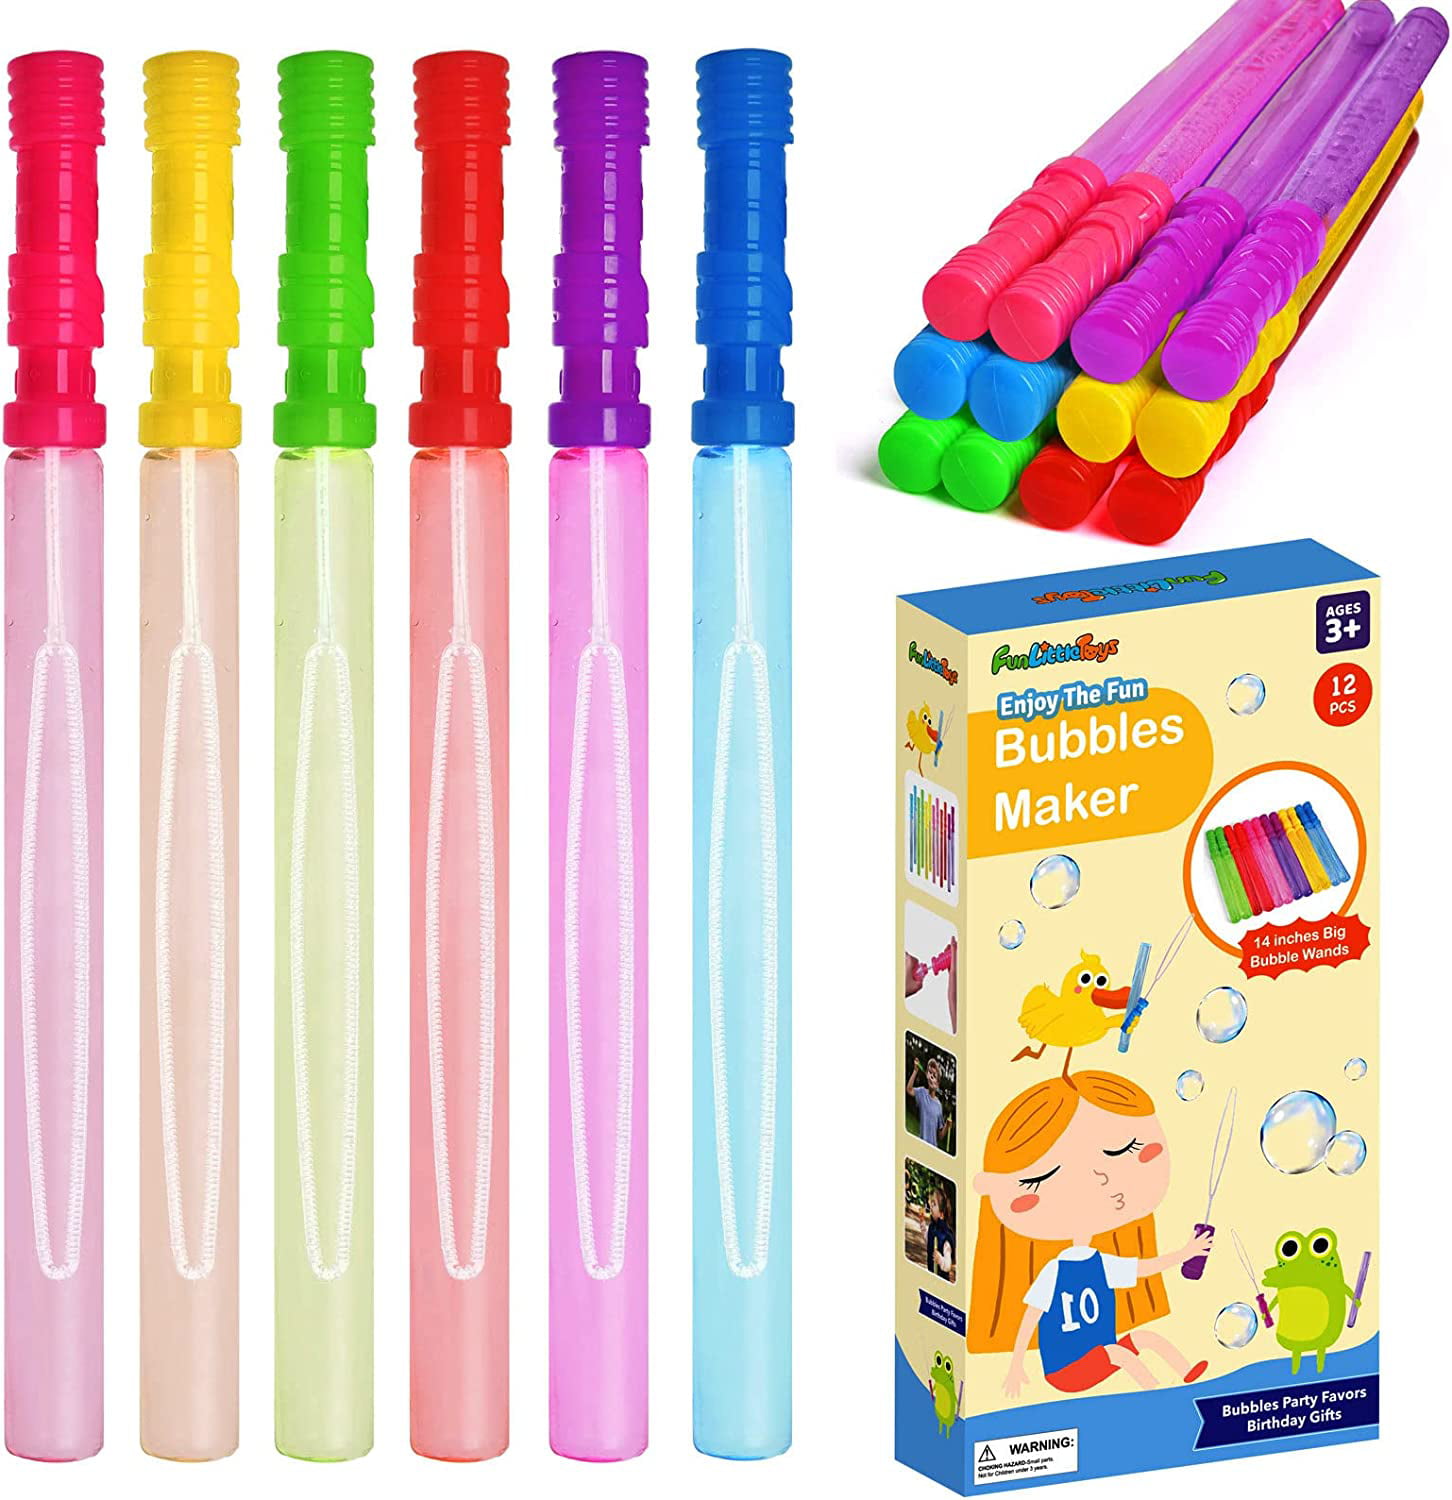 FiGoal Bubble Wands Set Suitable for All Ages People Ideal for Outdoor Playtime and Party Favors 16 Pack Giant Bubble Wands Funny Bubbles Maker with Tray 